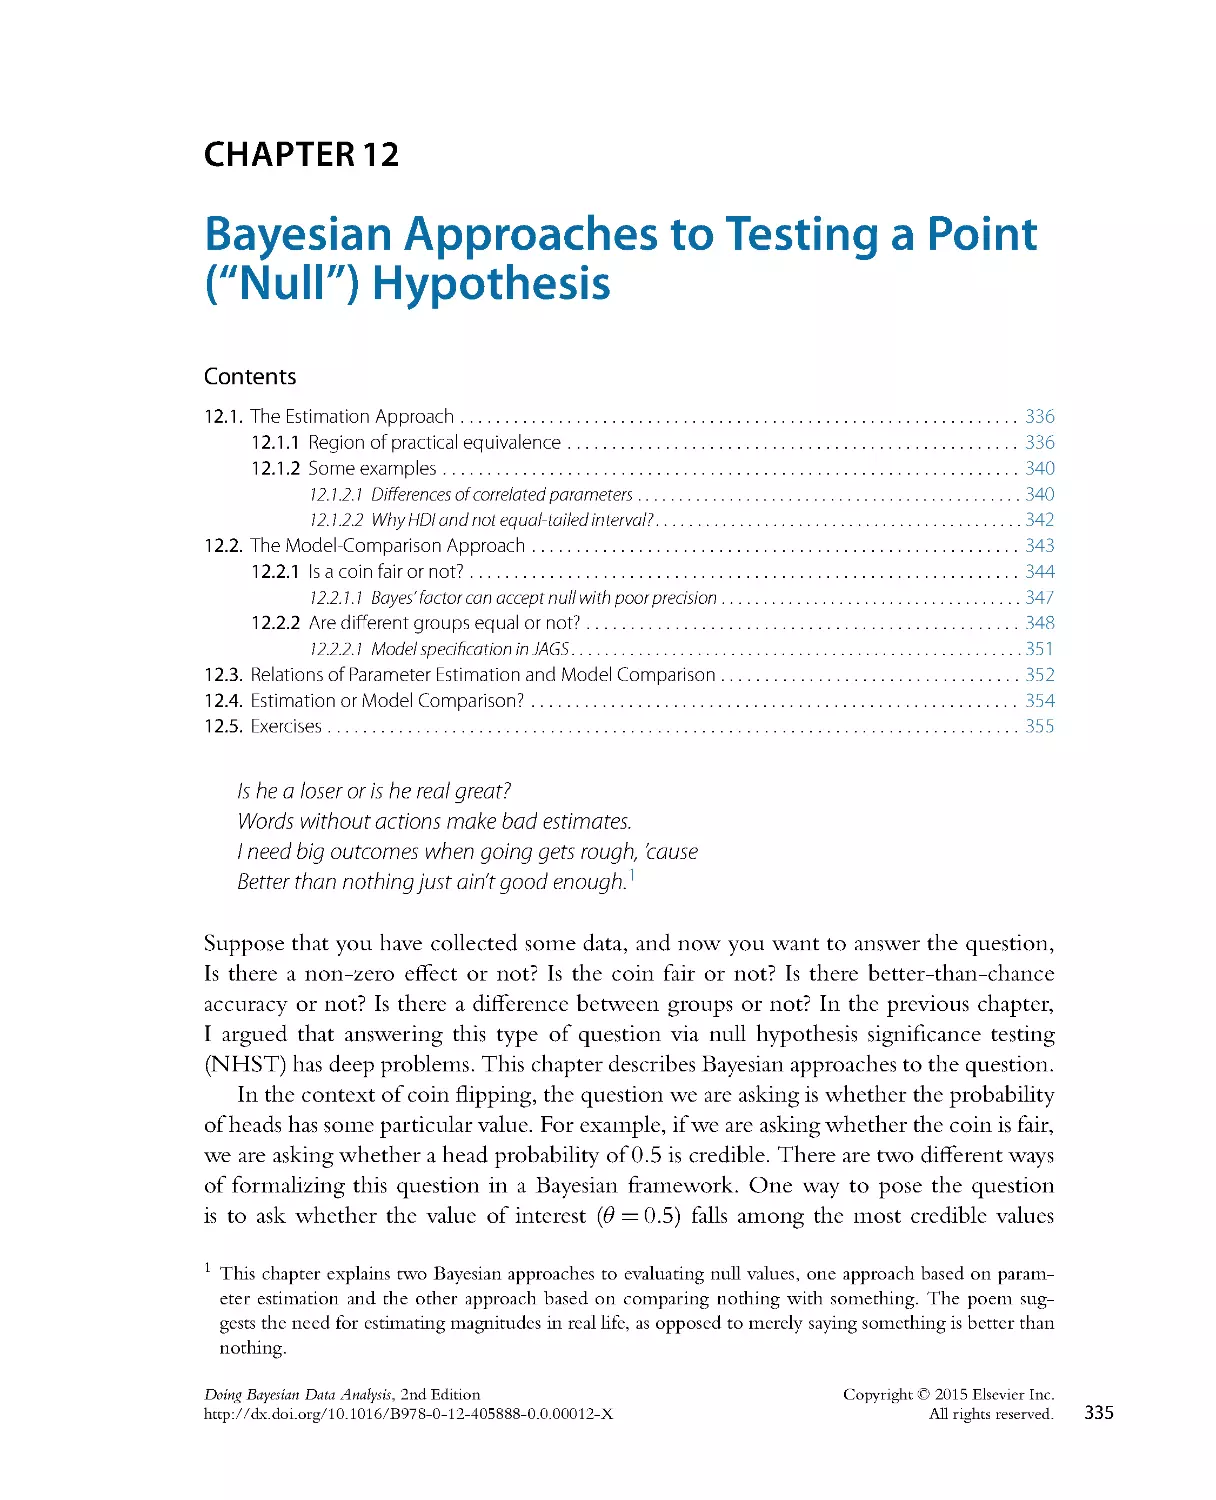 17. Chapter-12-Bayesian-Approaches-to-Testing-a-Point-Null-Hypothesis_2015_Doing-Bayesian-Data-Analysis-Second-Edition-